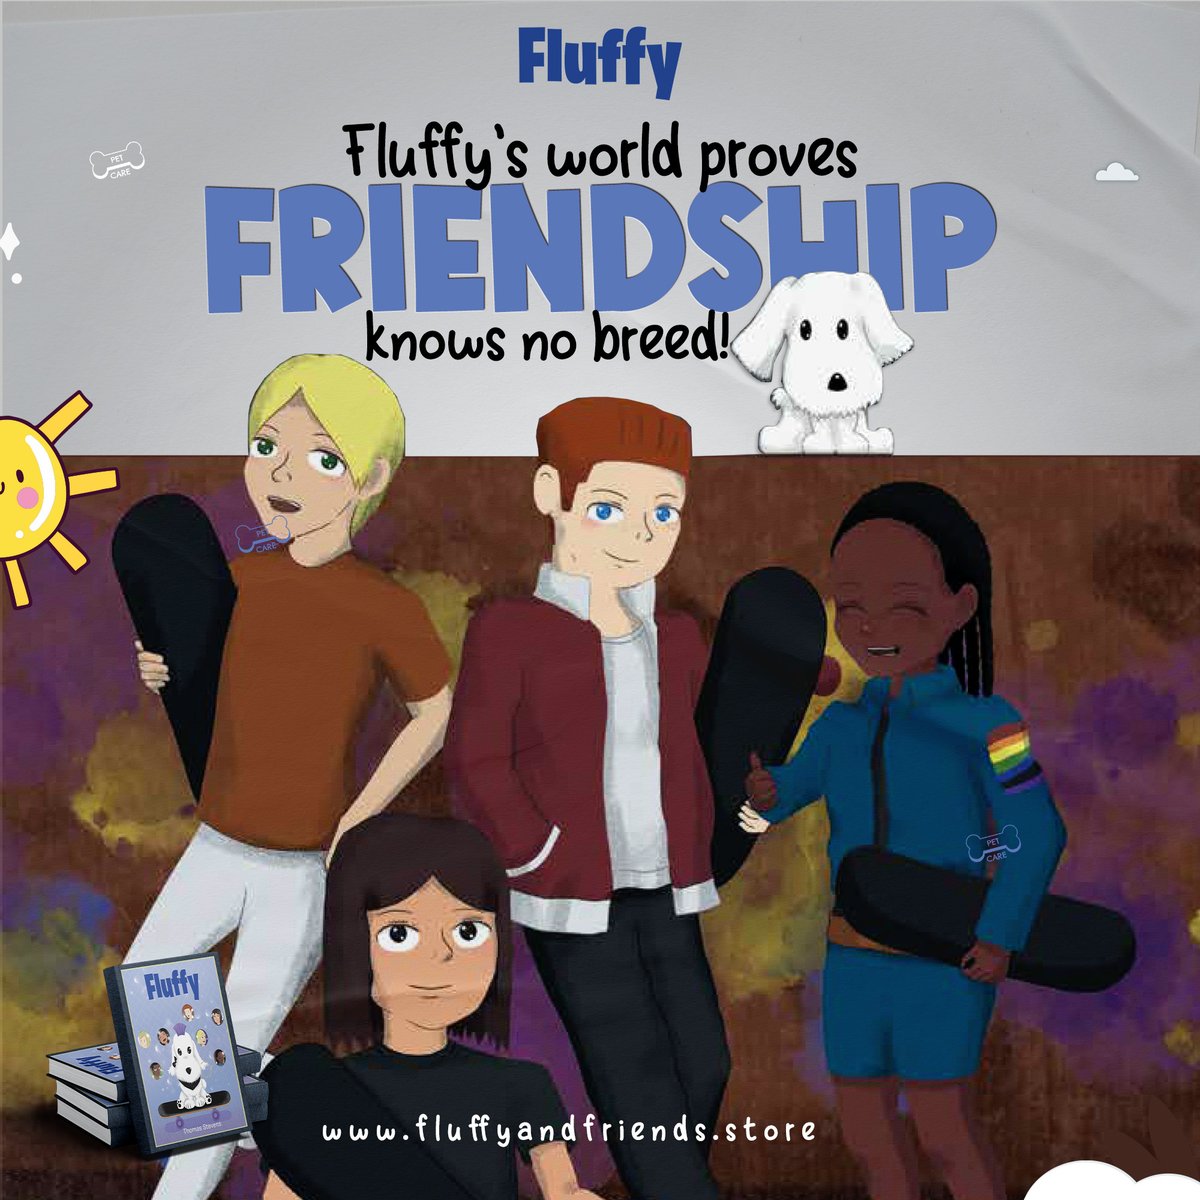 Get your ticket to Fluffy's world! In the enchanting realm of Fluffy, friendship blooms like spring flowers, and every woof is a love song. amzn.com/1662454406/ #Fluffy #ThomasStevens #inclusivity #diversity #friendship #author #authorlife #goodreads #reading #booktwt